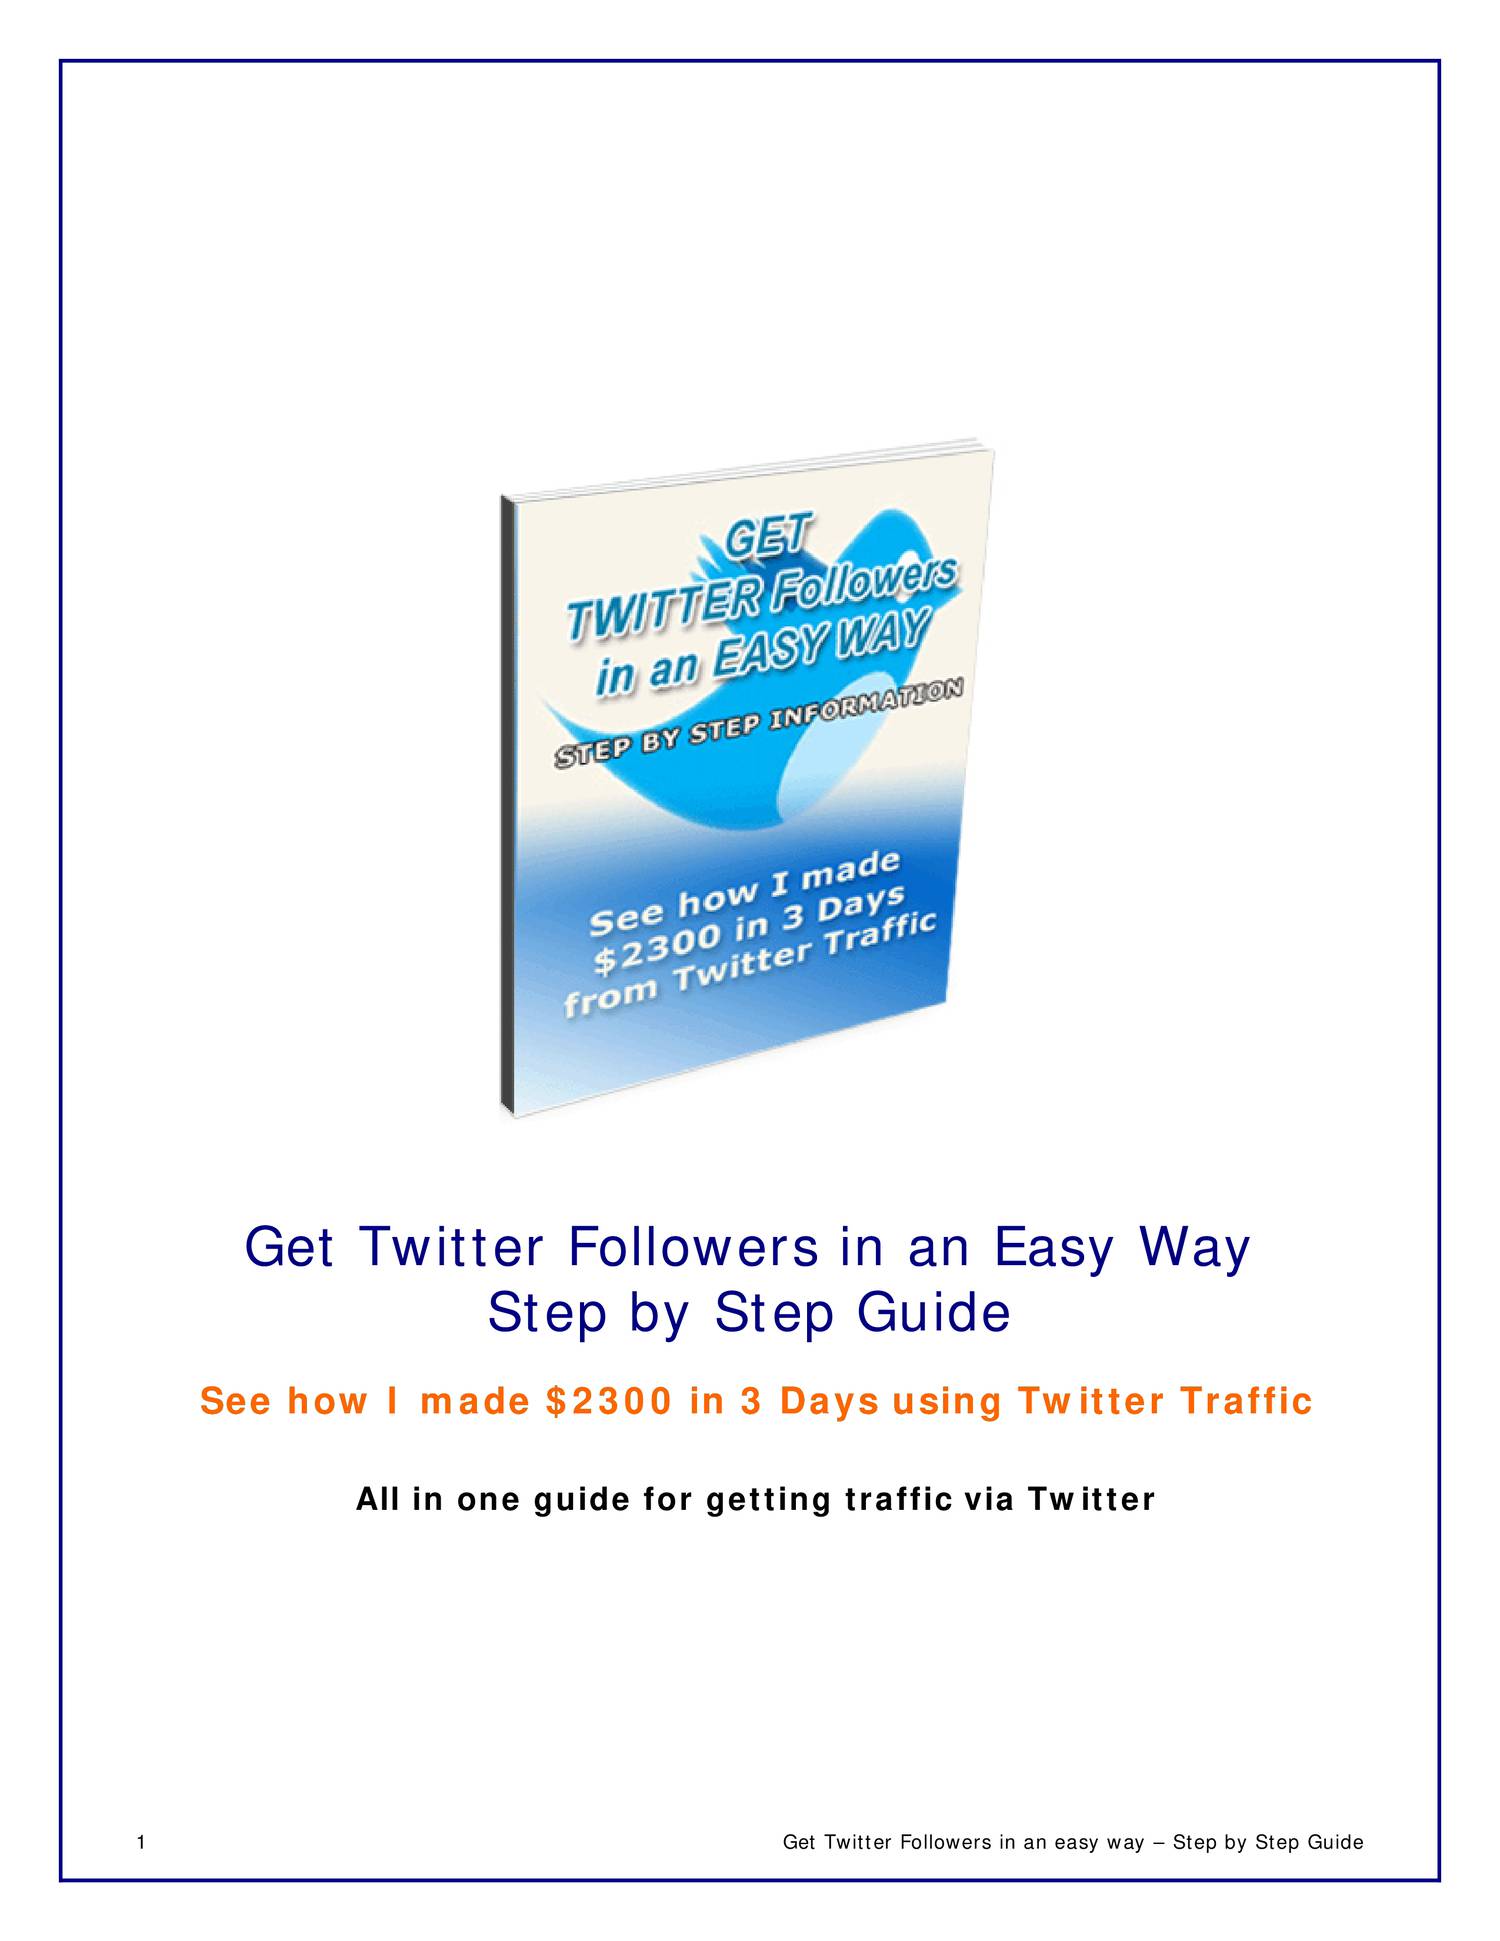 How to get followers on twitter 1 pdf docdroid